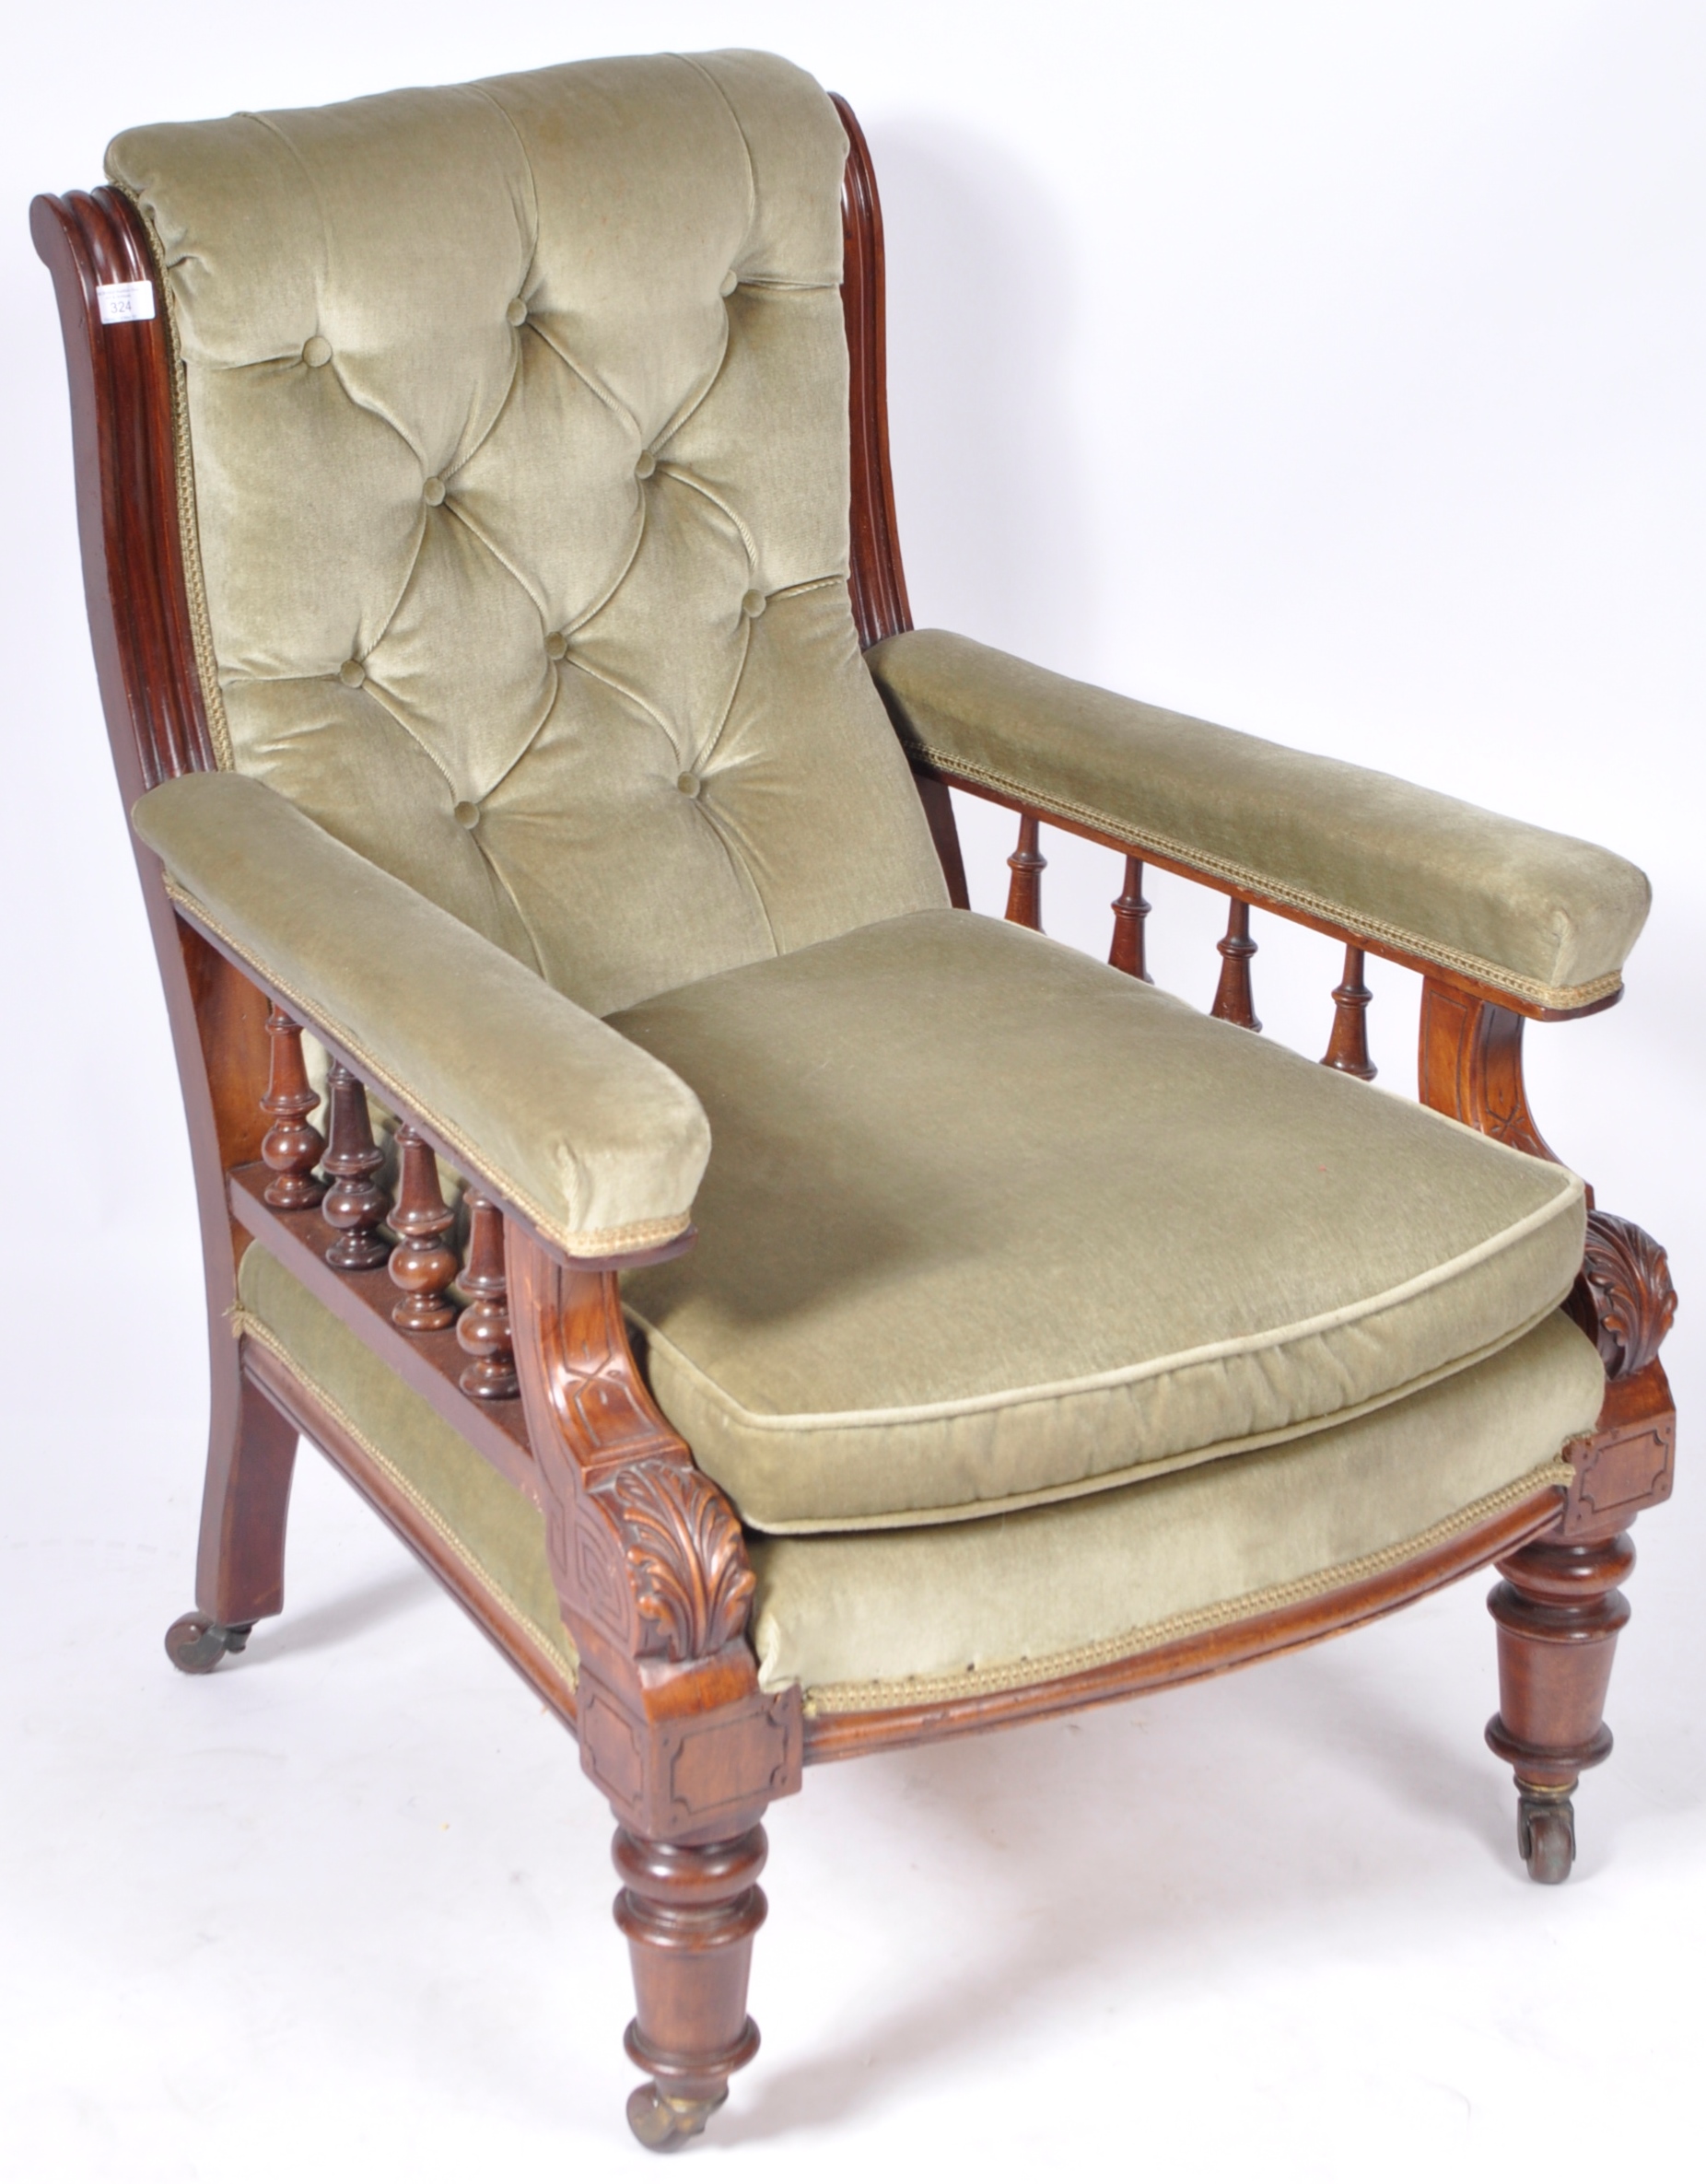 ANTIQUE 19TH CENTURY VICTORIAN MAHOGANY LIBRARY ARMCHAIR - Image 2 of 10